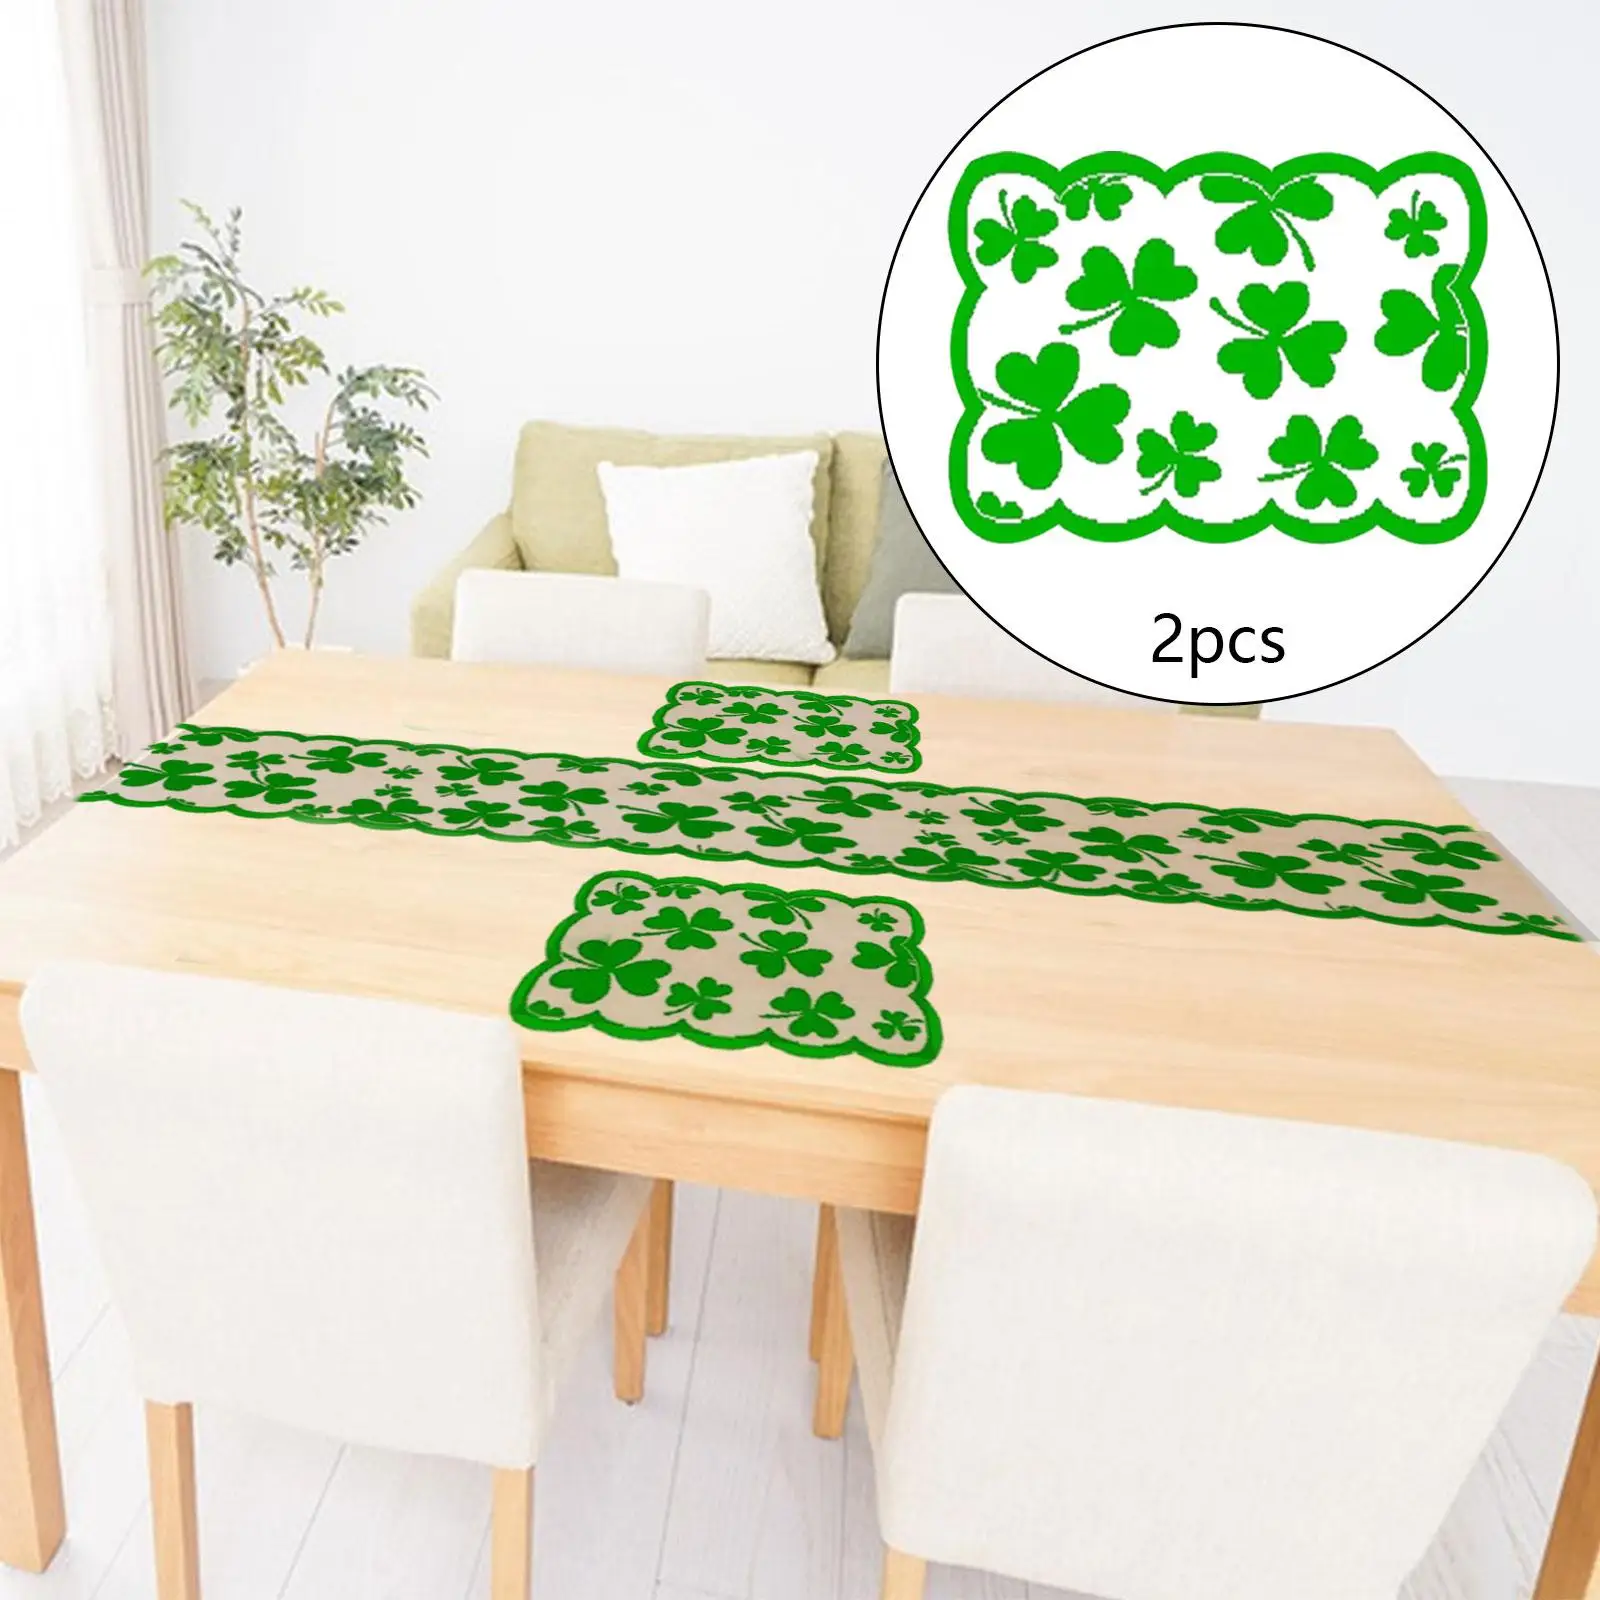 

2Pcs Placemats 45x30cm Durable Lace ST Patricks Day Decor Irish Festival Green for Indoor Kitchen Party Bar Holiday Dinner